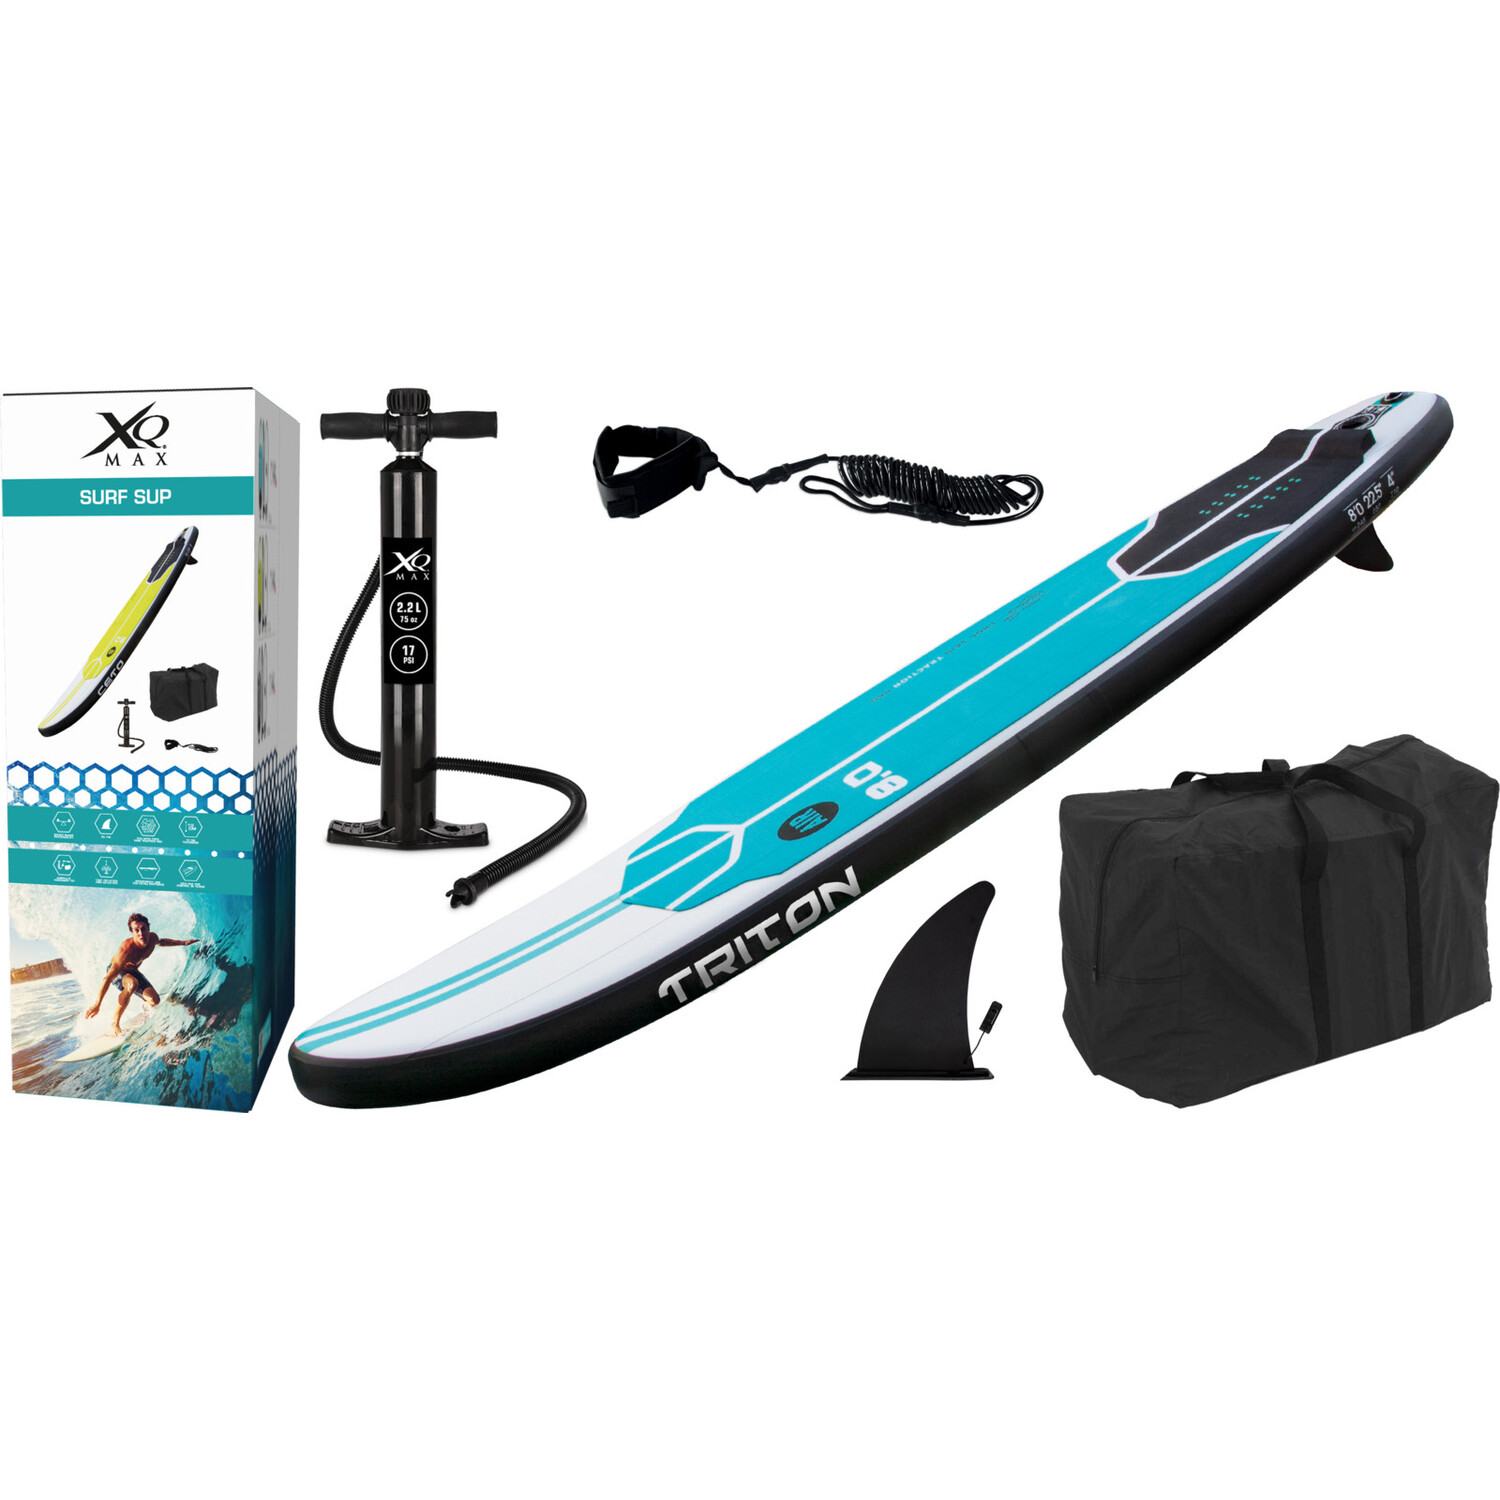 XQMAX 245 Surf Paddle Board - Blue Image 1